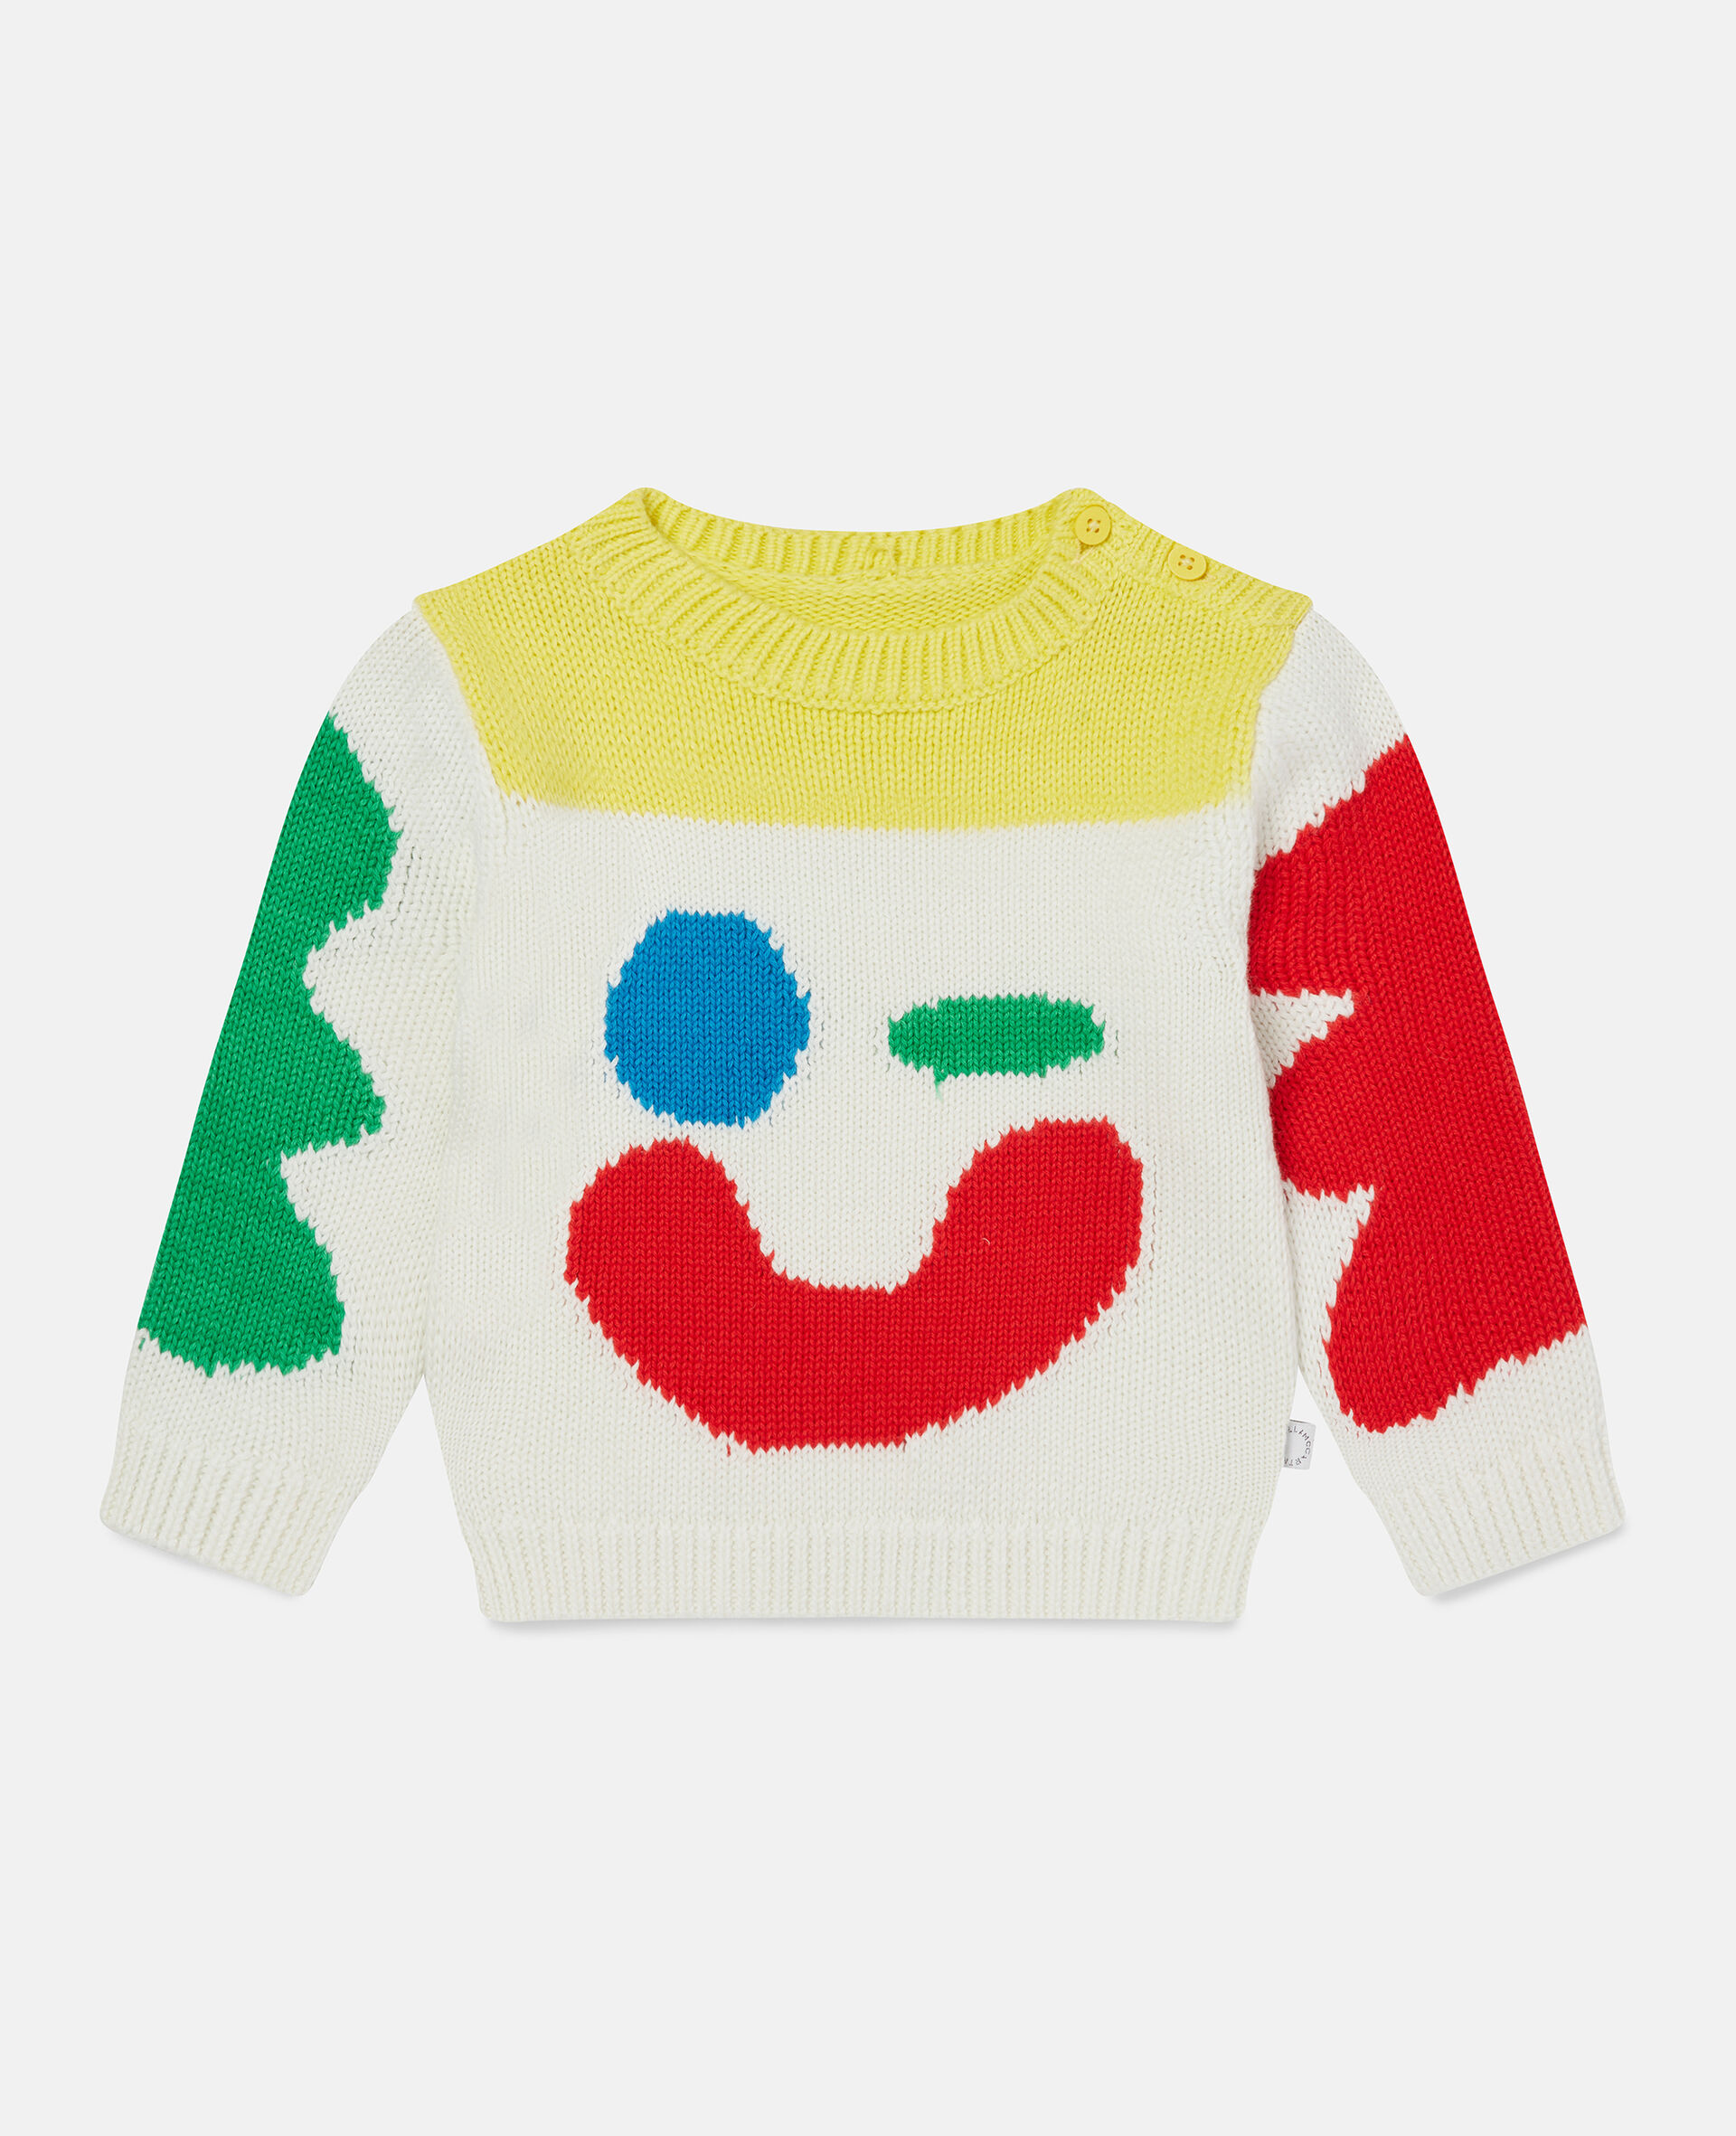 Smiley Face Knit Intarsia Jumper-White-large